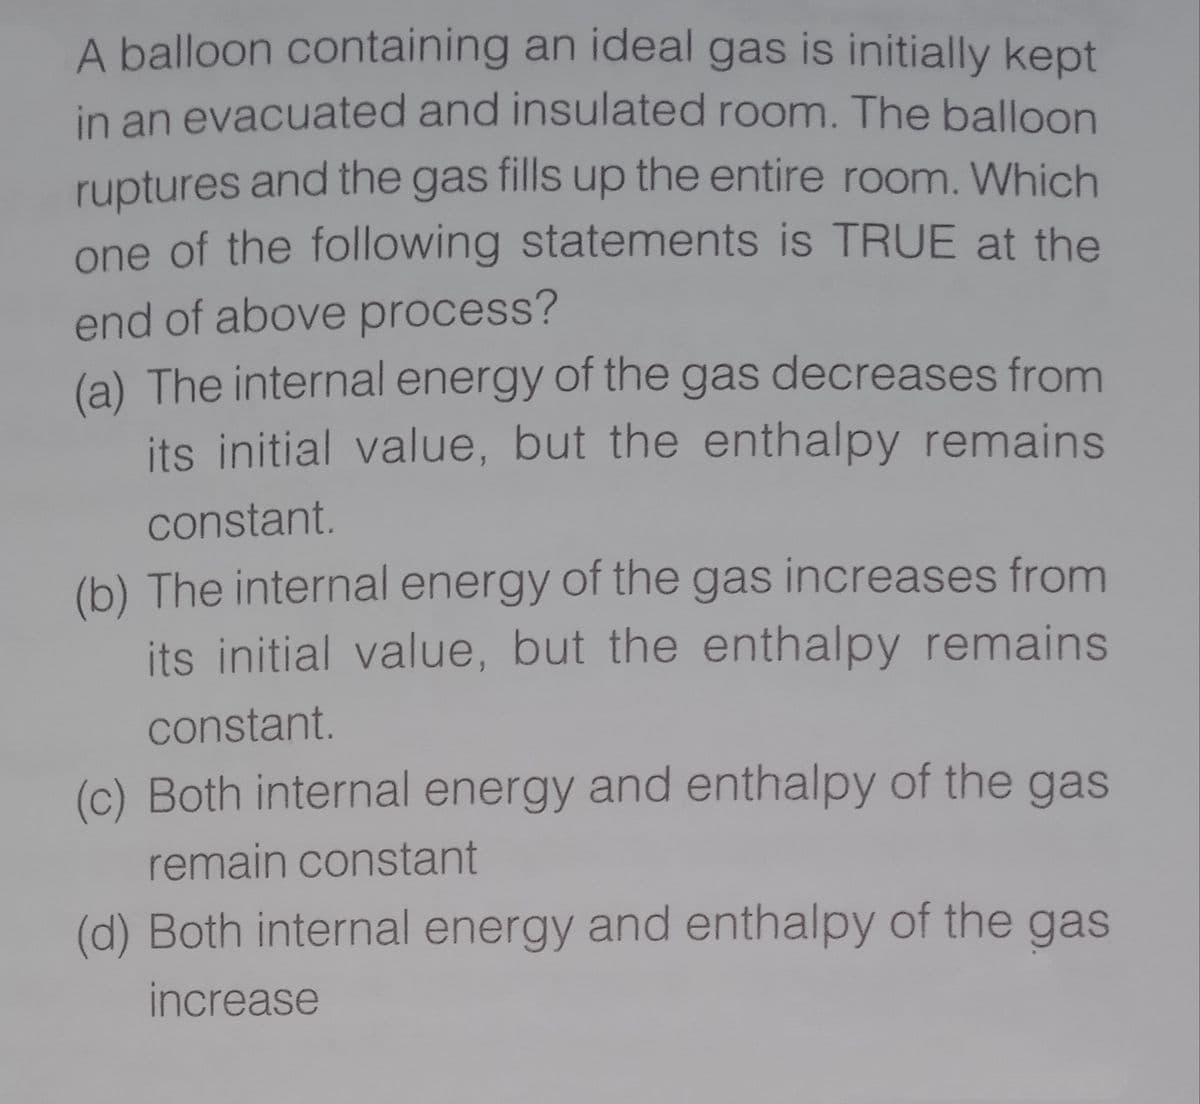 A balloon containing an ideal gas is initially kept
in an evacuated and insulated room. The balloon
ruptures and the gas fills up the entire room. Which
one of the following statements is TRUE at the
end of above process?
(a) The internal energy of the gas decreases from
its initial value, but the enthalpy remains
constant.
(b) The internal energy of the gas increases from
its initial value, but the enthalpy remains
constant.
(c) Both internal energy and enthalpy of the gas
remain constant
(d) Both internal energy and enthalpy of the gas
increase
